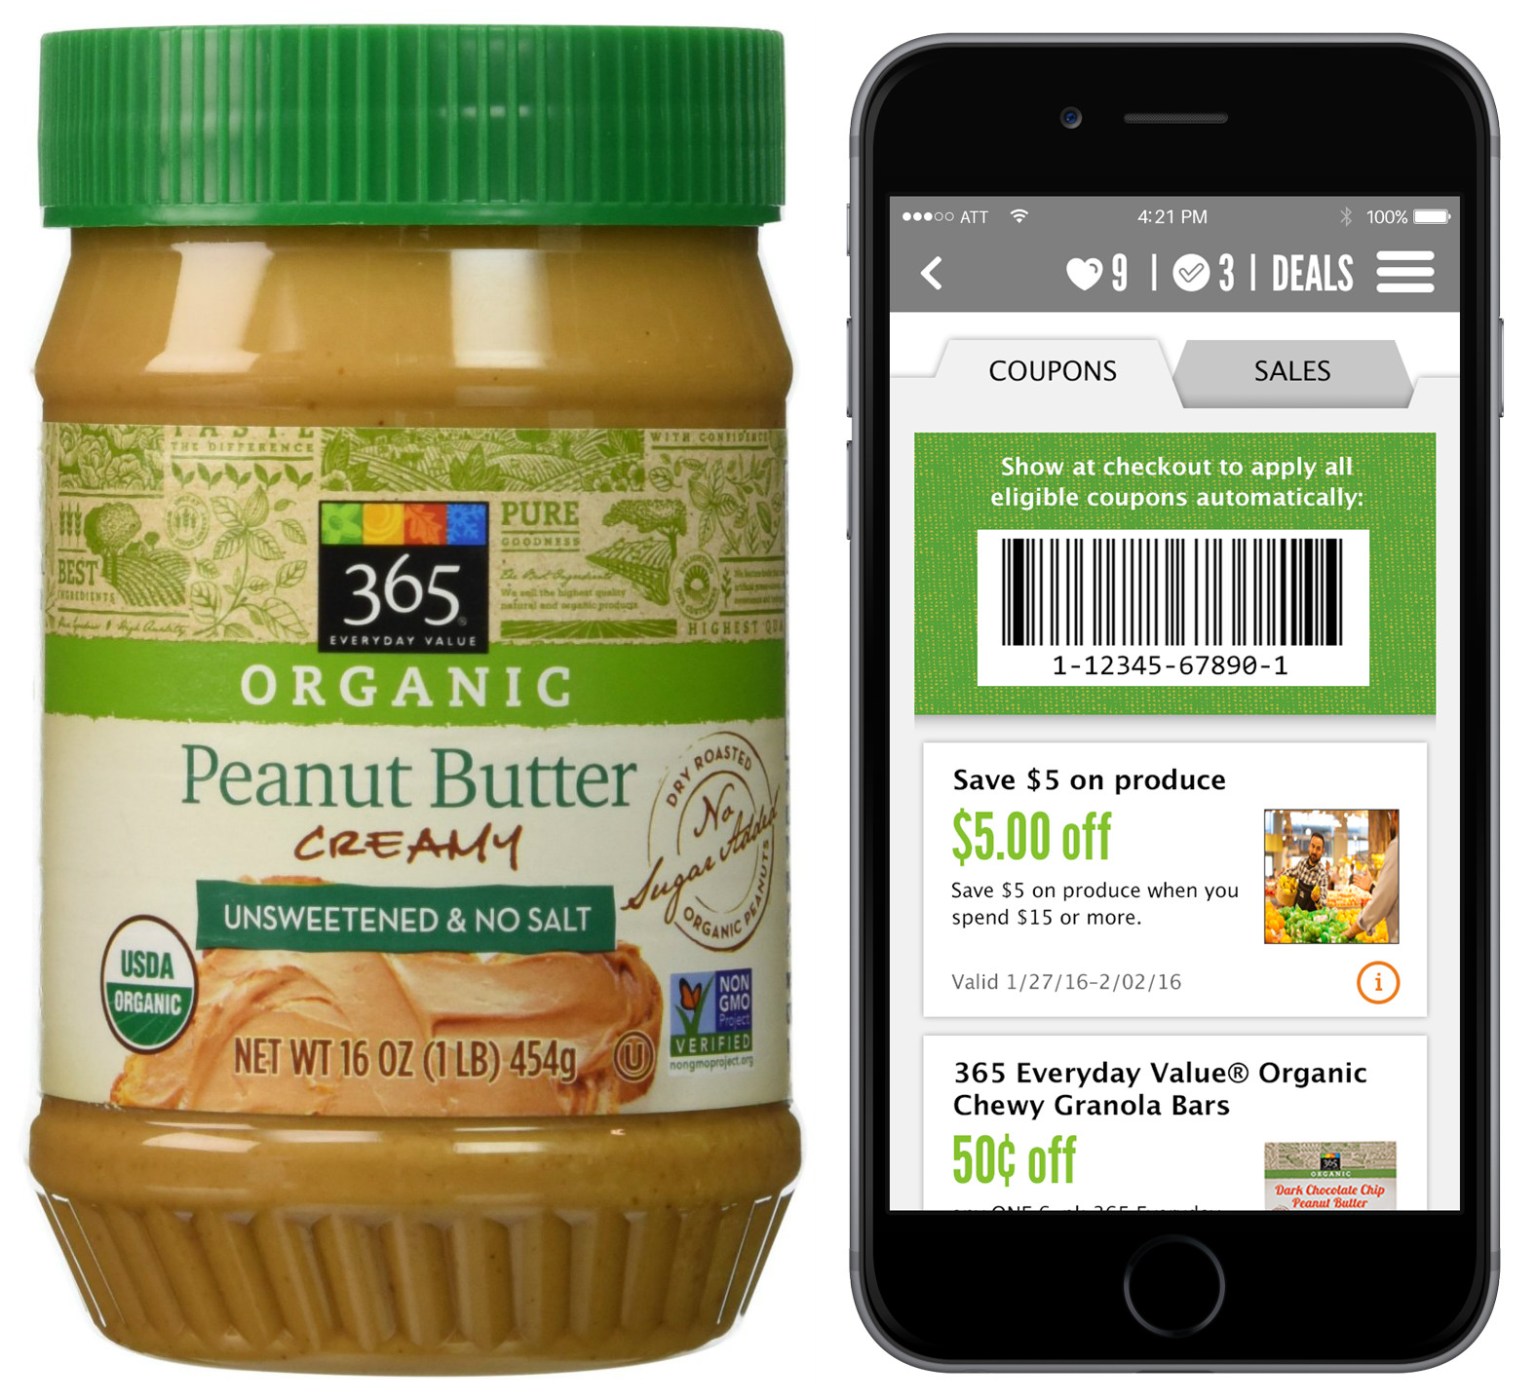 whole-foods-market-app-new-store-coupons-free-365-everyday-value